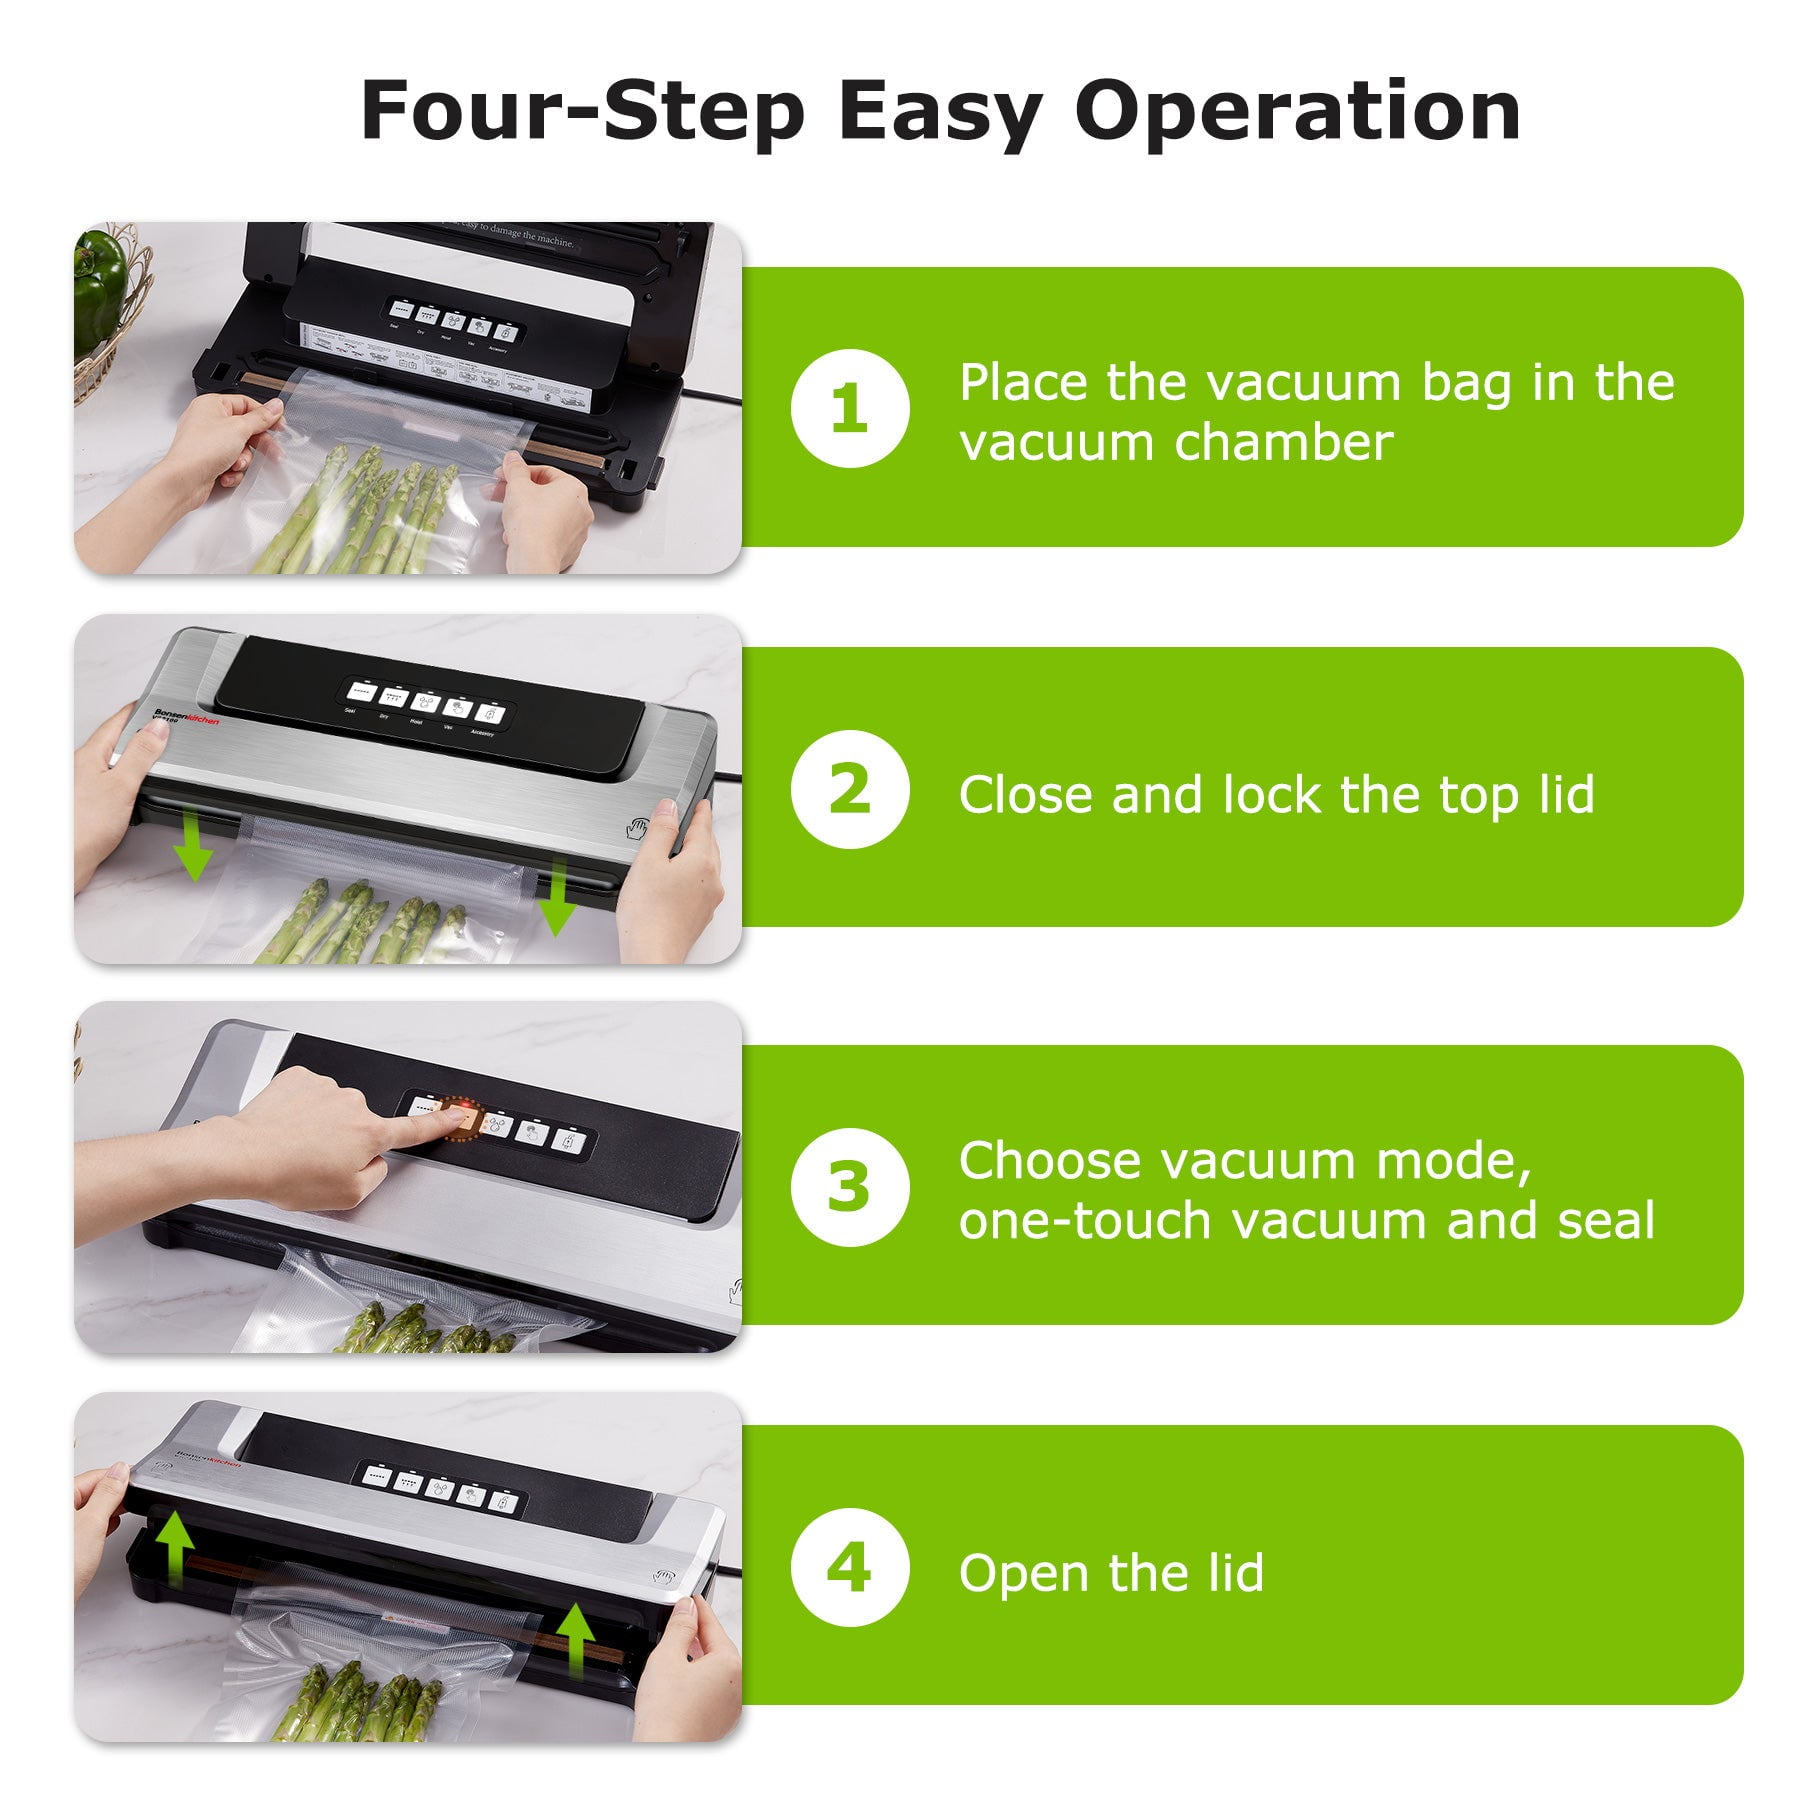 Bonsenkitchen Vacuum Sealer Machine, Stainless Steel Vacuum Food Sealer with 8-in-1 Vacuum Sealing System, 6 Food Vacuum Modes, Built-in Cutter and